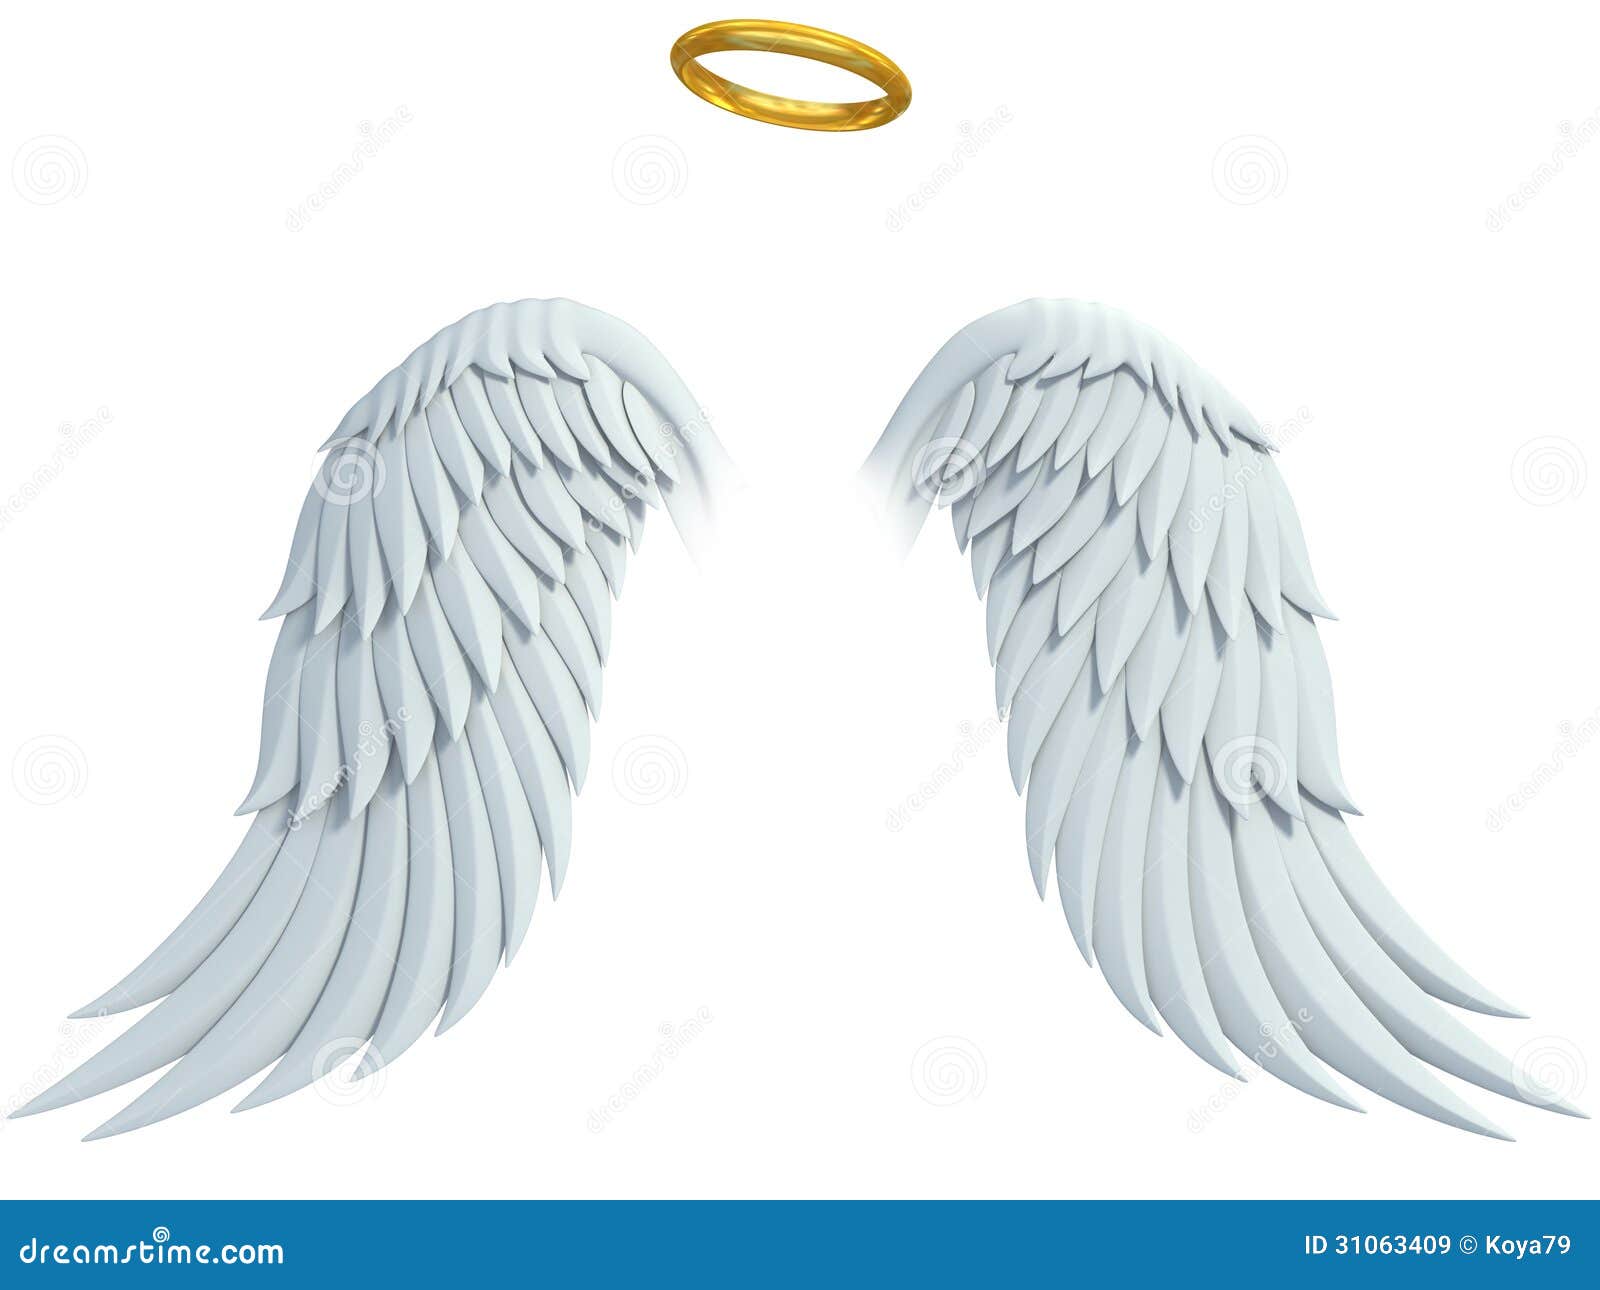 free clipart angel wings halo - photo #47